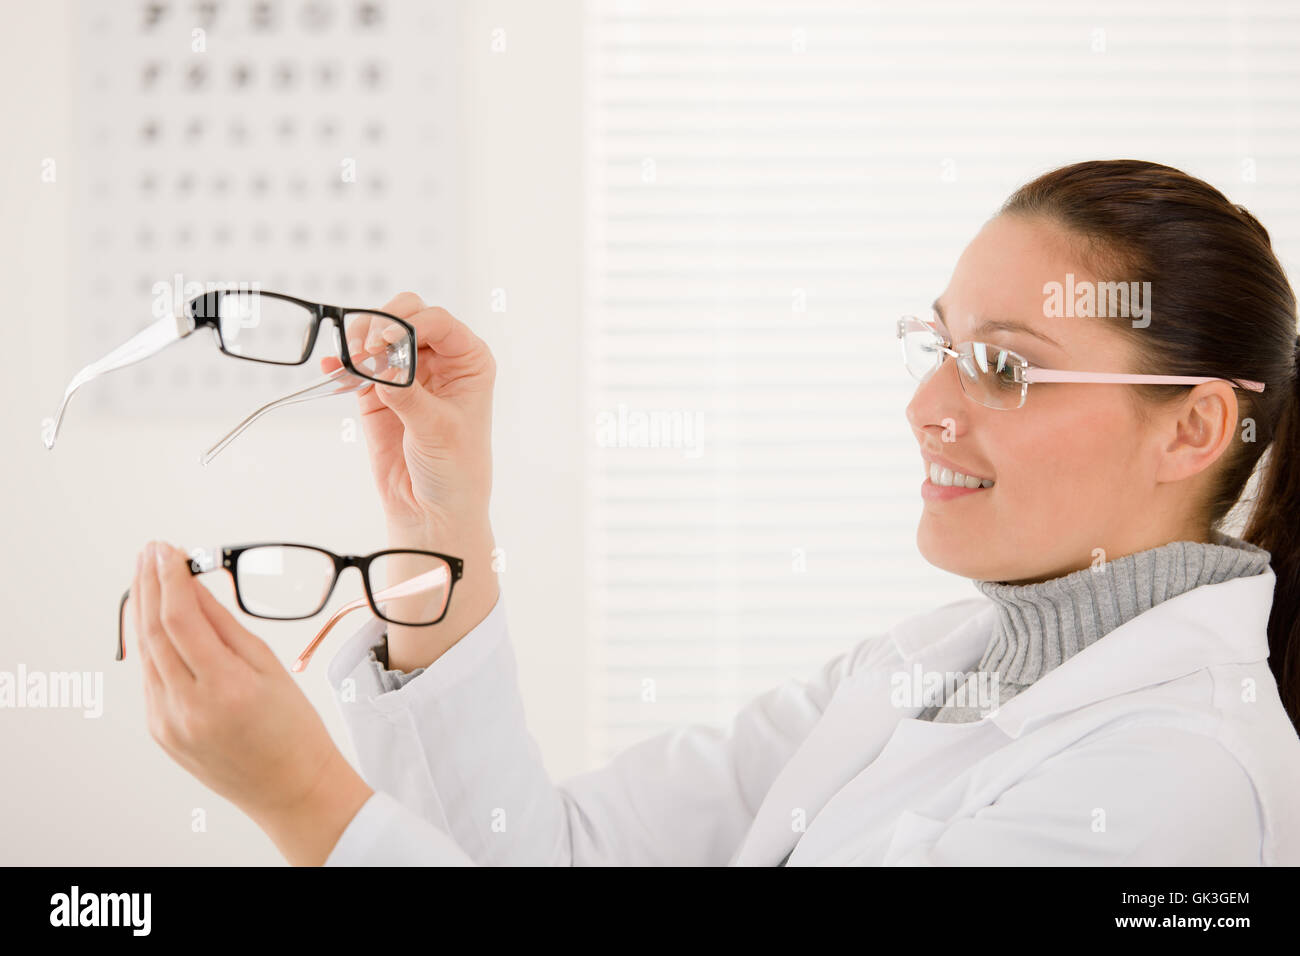 woman spectacles glasses Stock Photo